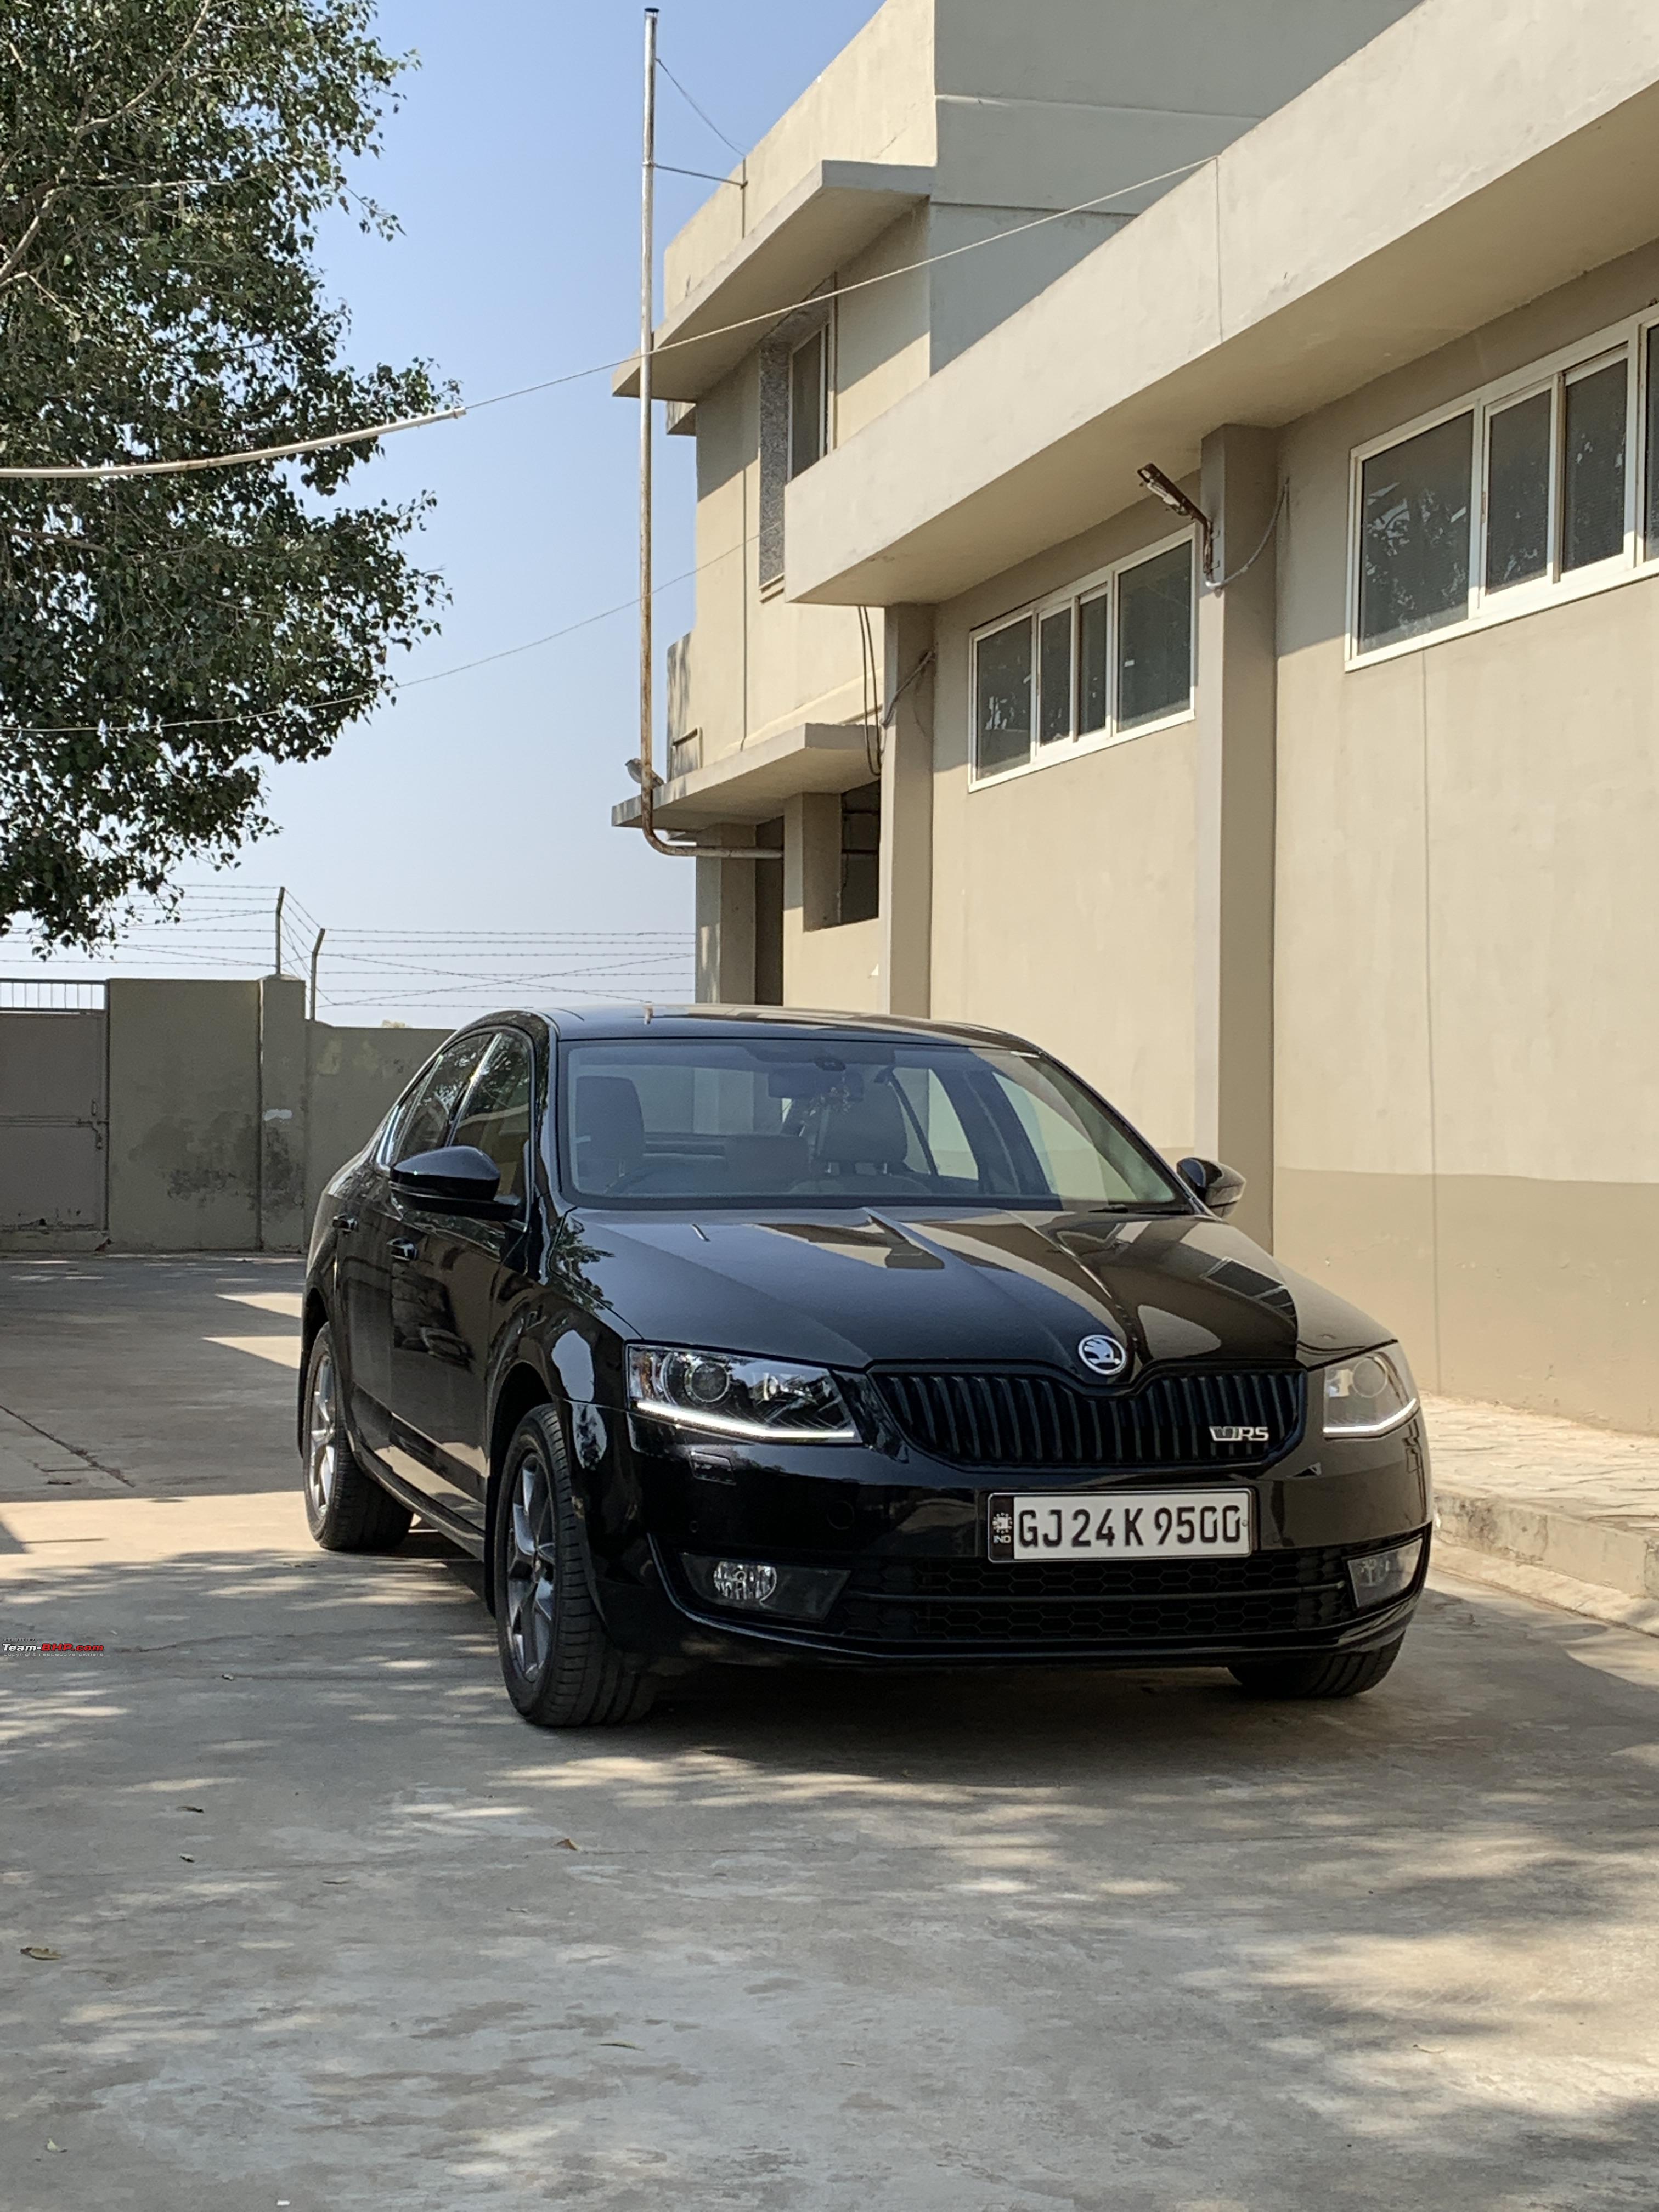 2022 Skoda Octavia L&K ownership: What it's like after 1 year & 12k km